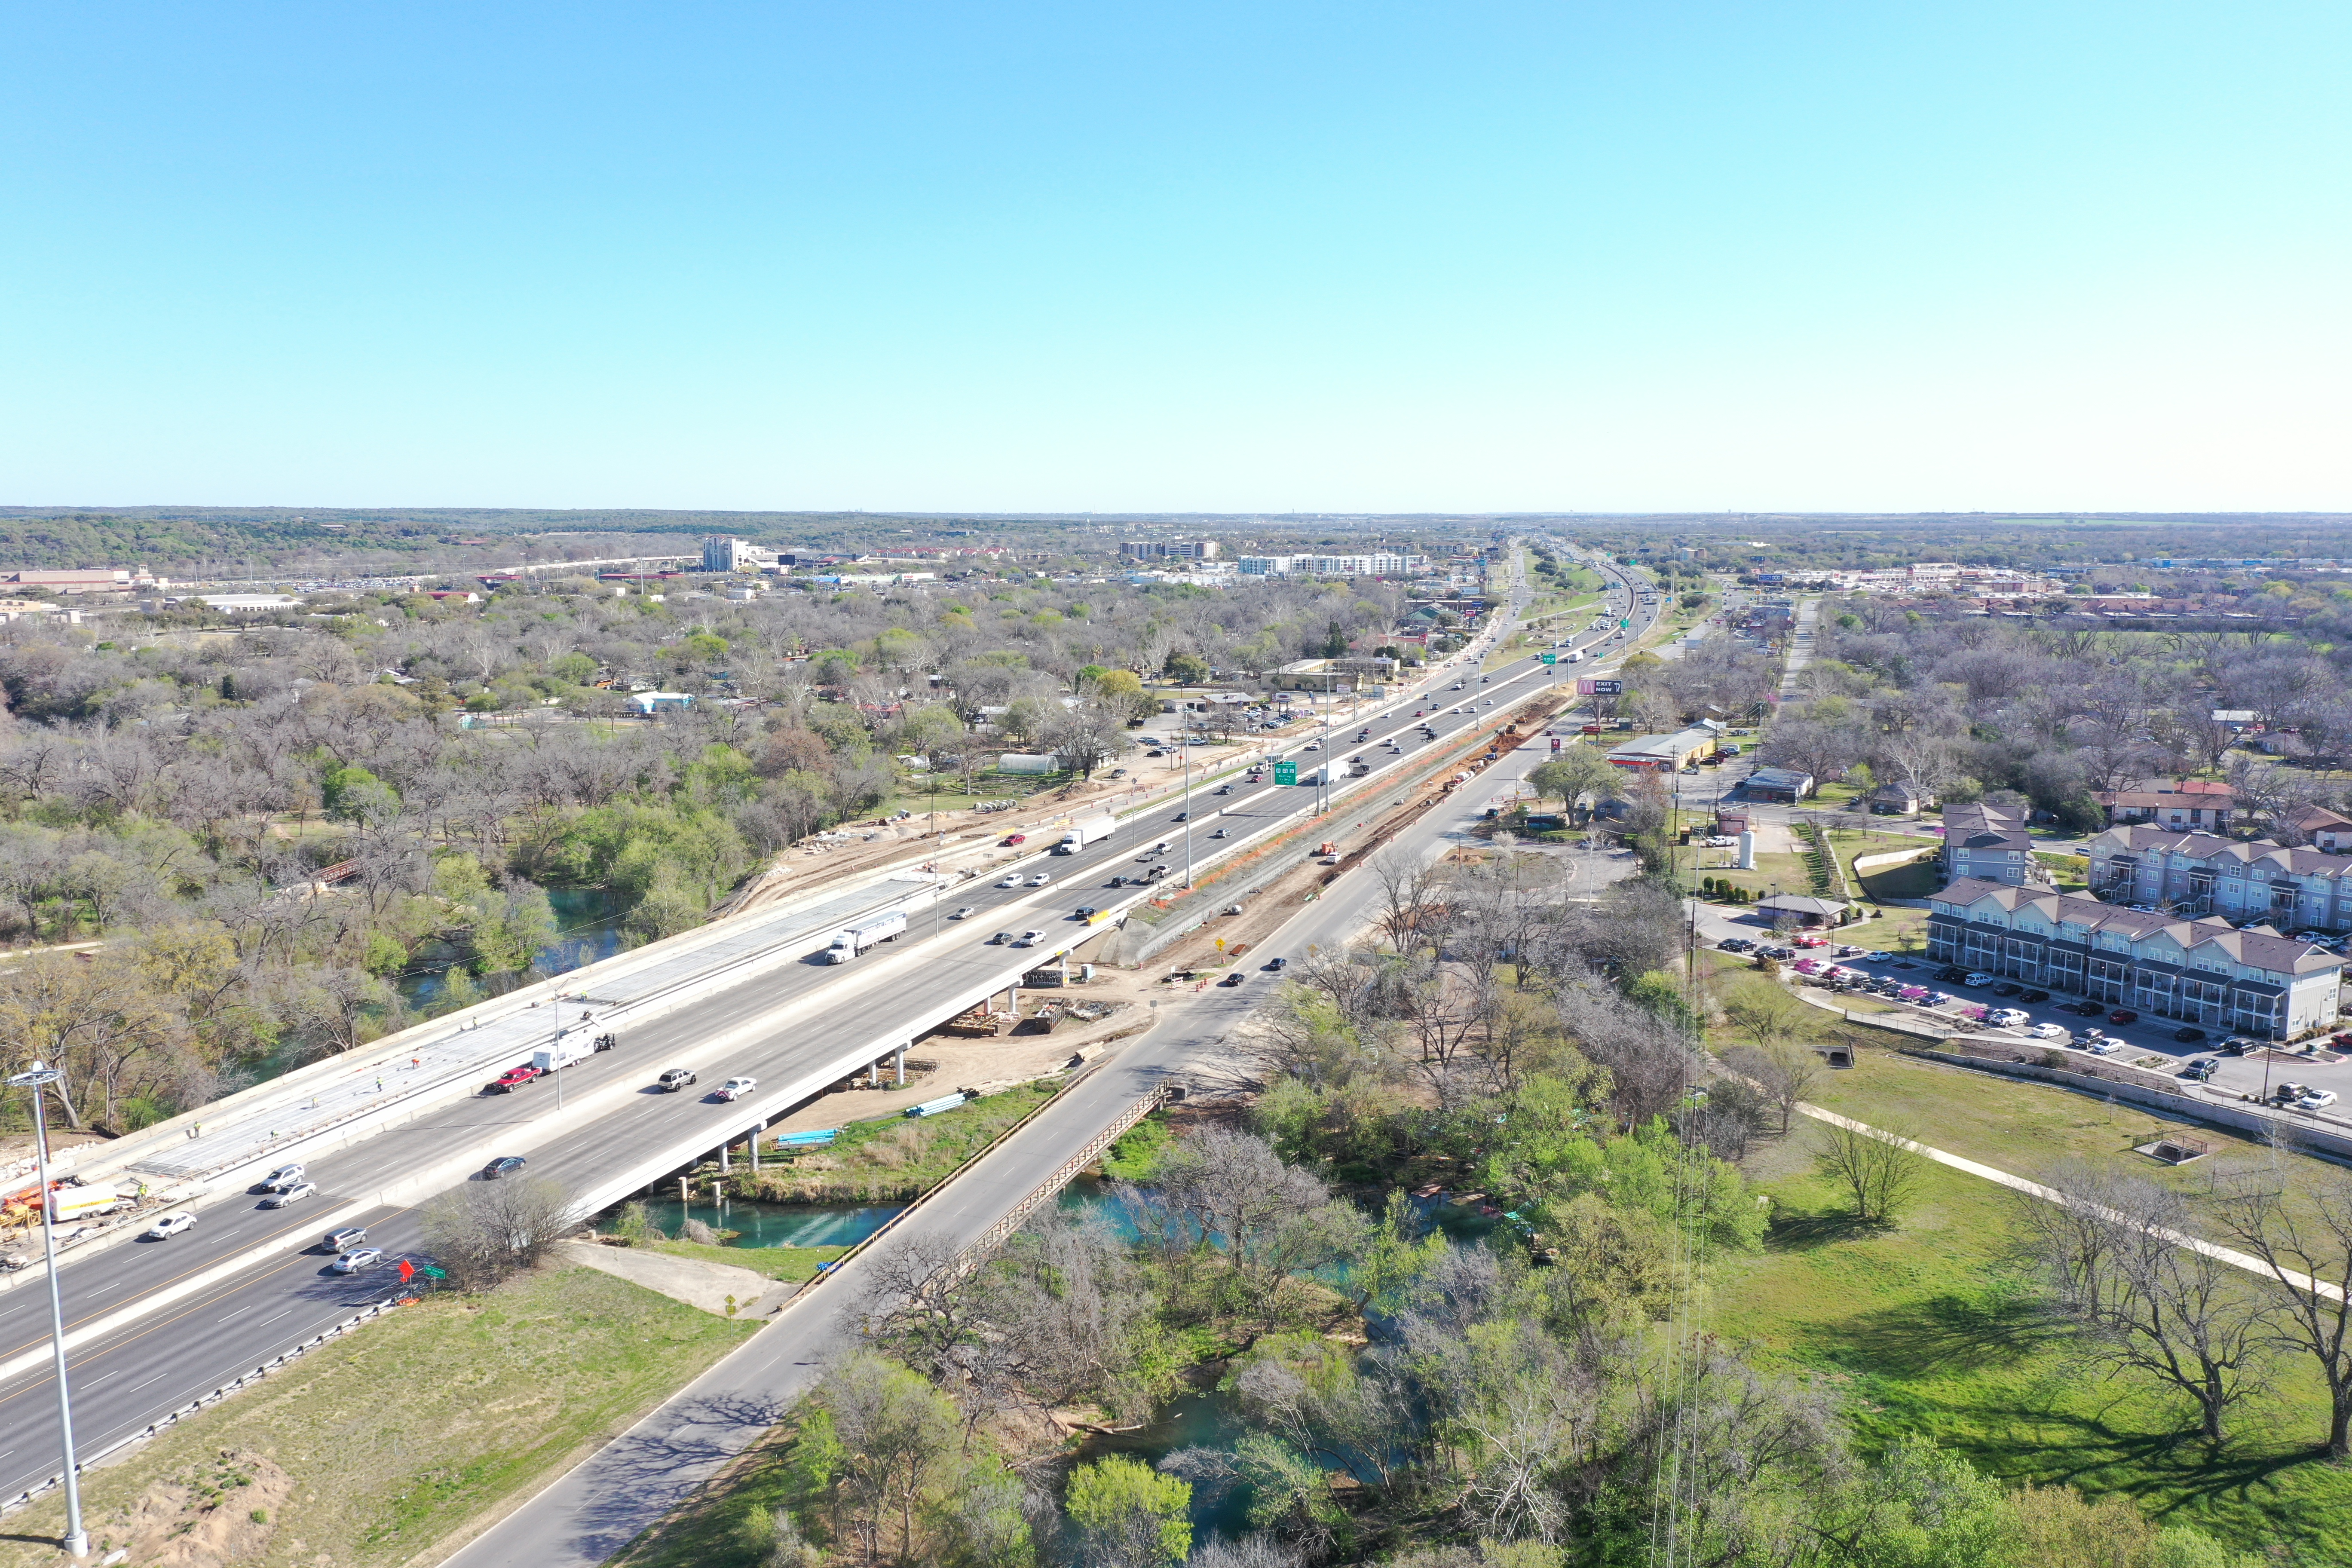 Northbound I-35 frontage road over Willow Springs Creek - March 2022 